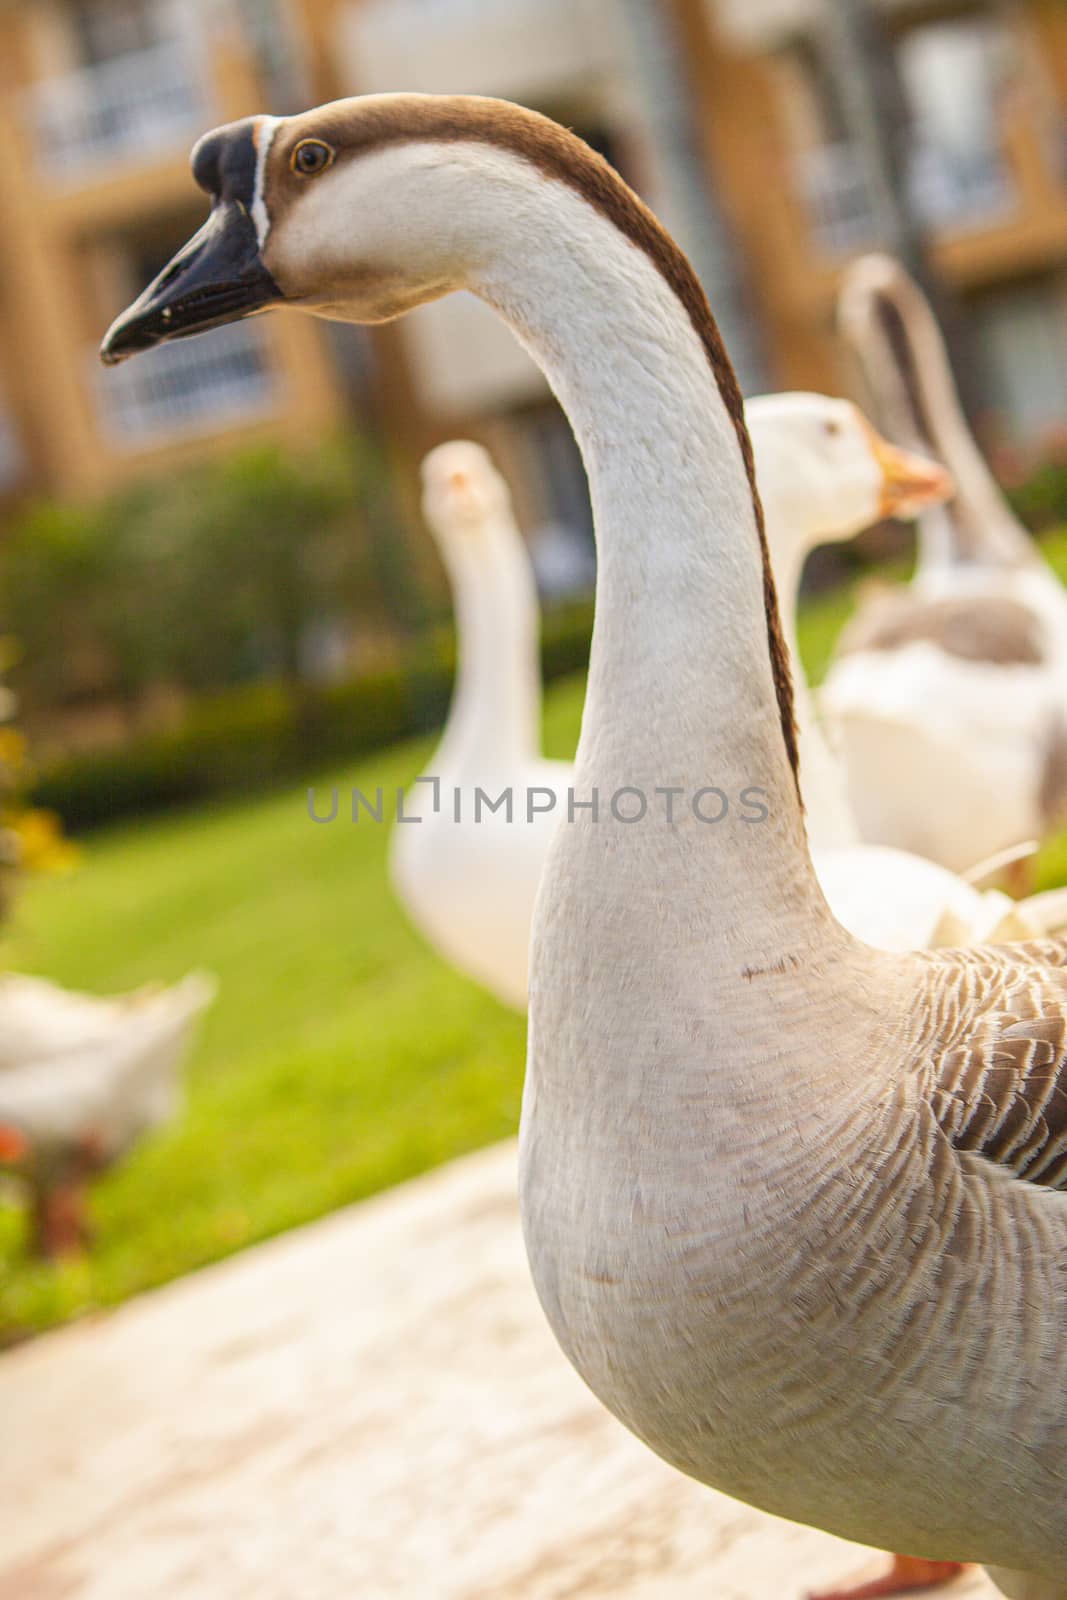 Anser cygnoides Also called the Capitol Goose 4 by pippocarlot